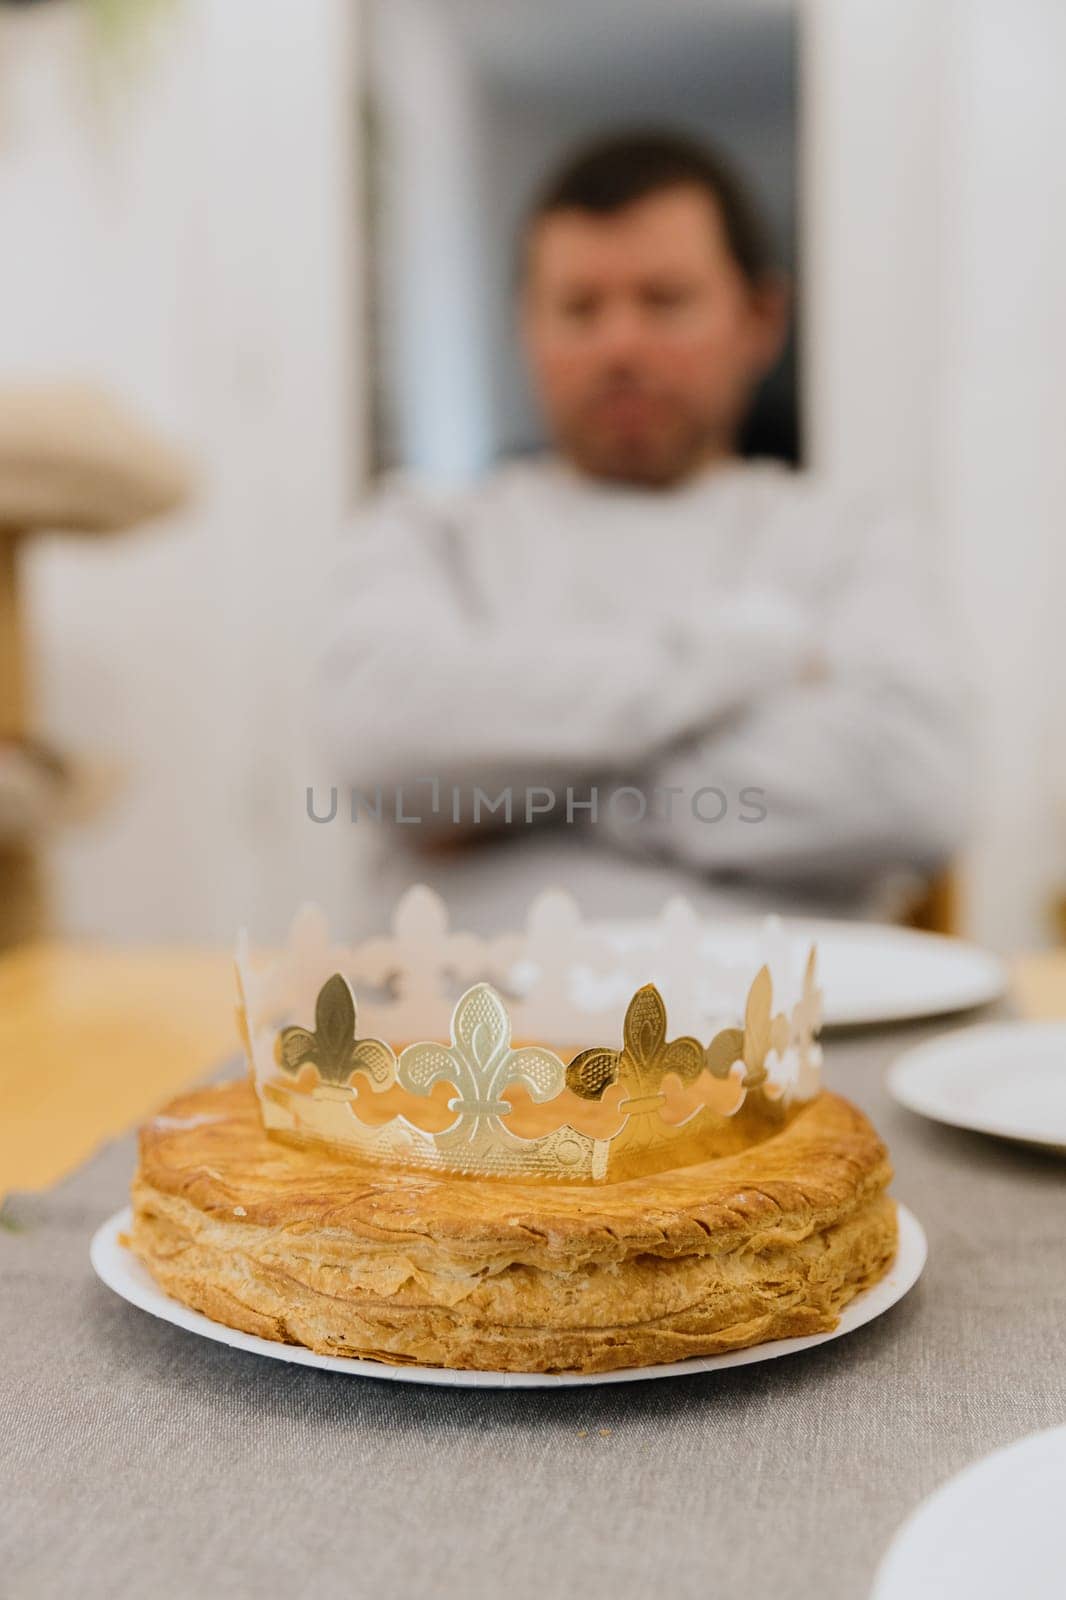 One delicious puff royal galette with a golden paper crown lies in a plate on a wooden table, against the background of a blurred man, side view close-up.